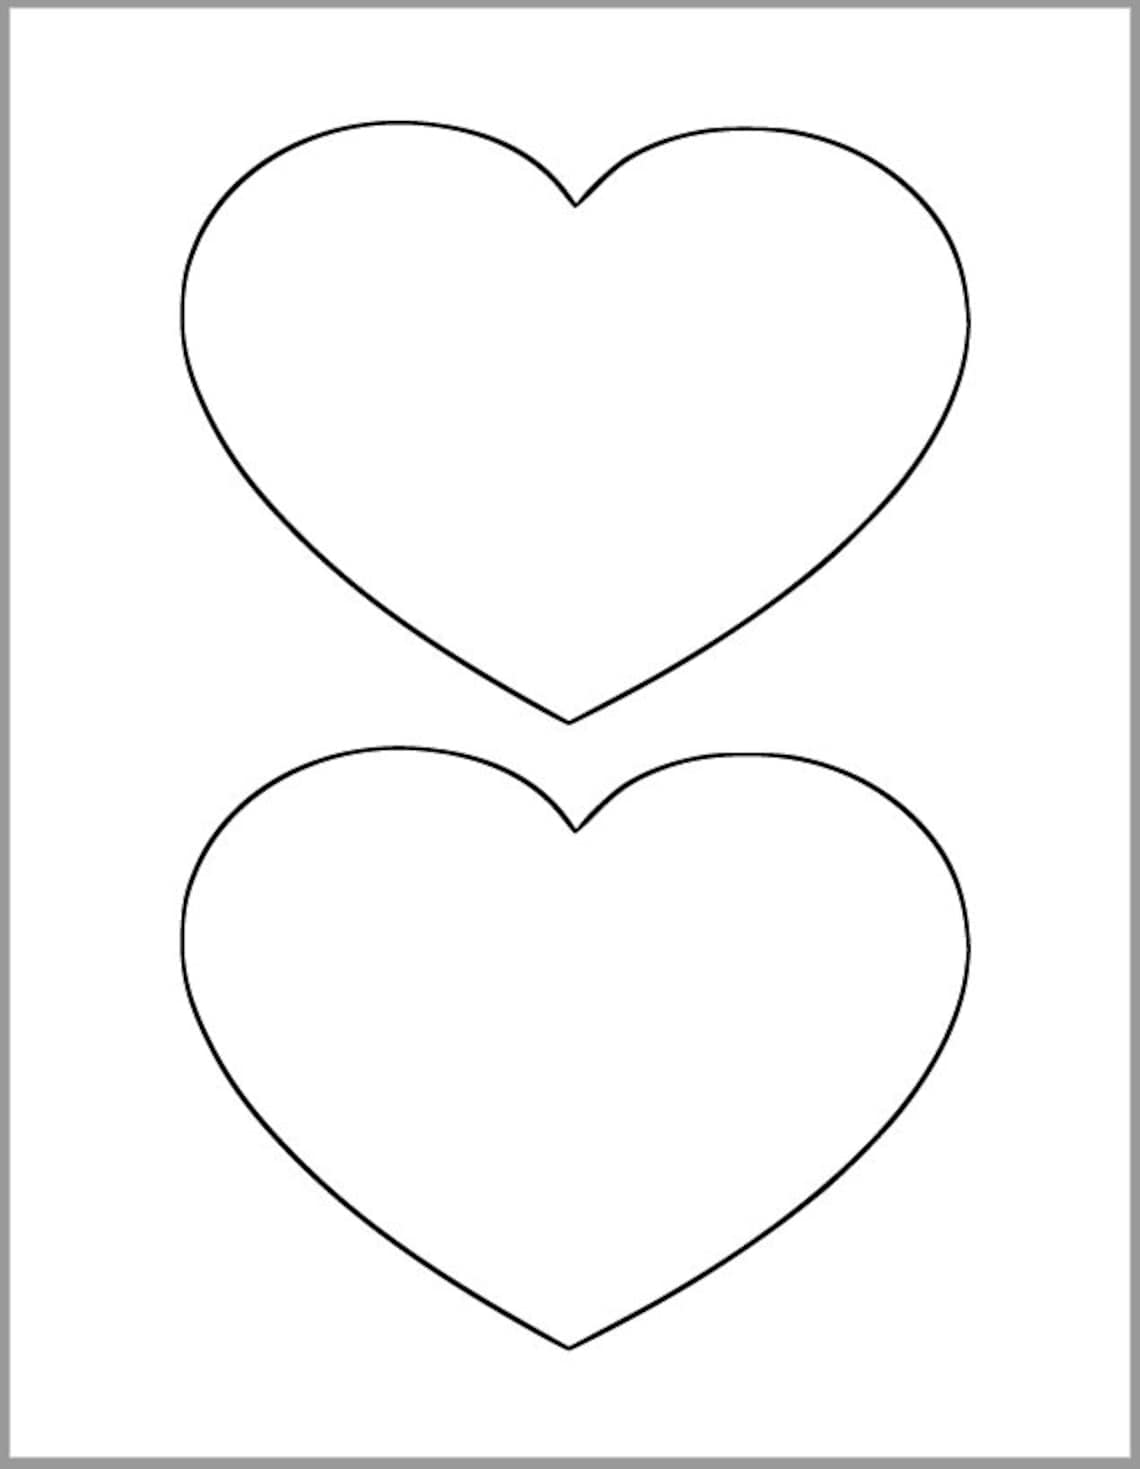 6-inch-heart-printable-template-large-heart-cutout-valentines-etsy